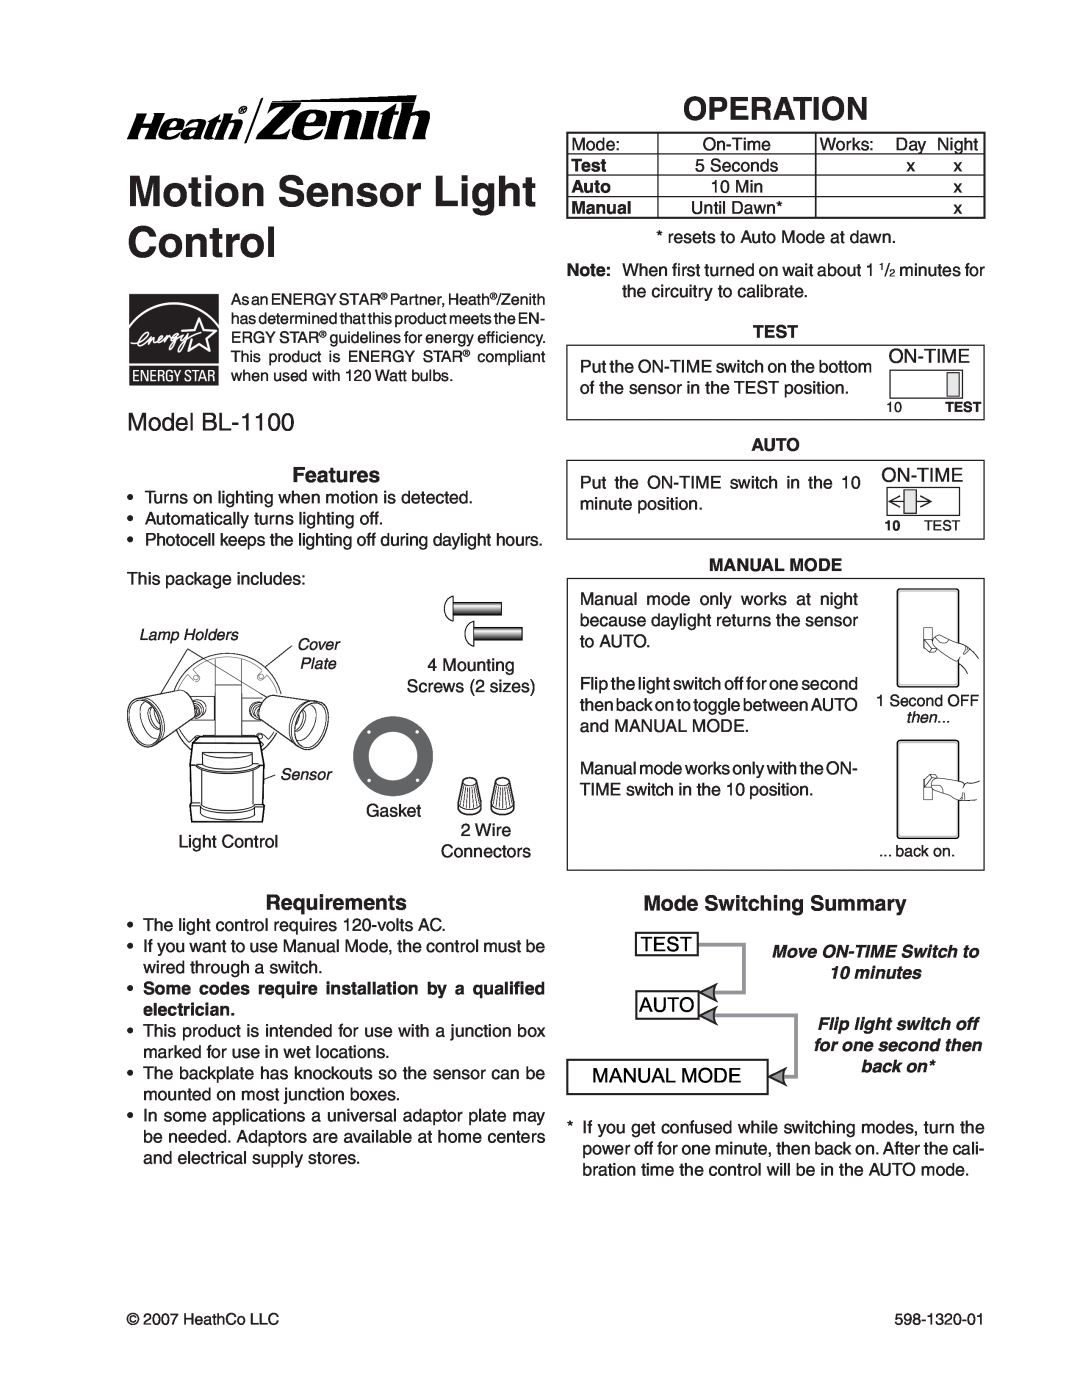 Heath Zenith manual Motion Sensor Light Control, Operation, Model BL-1100, Features, Requirements, On-Time, Test, Auto 